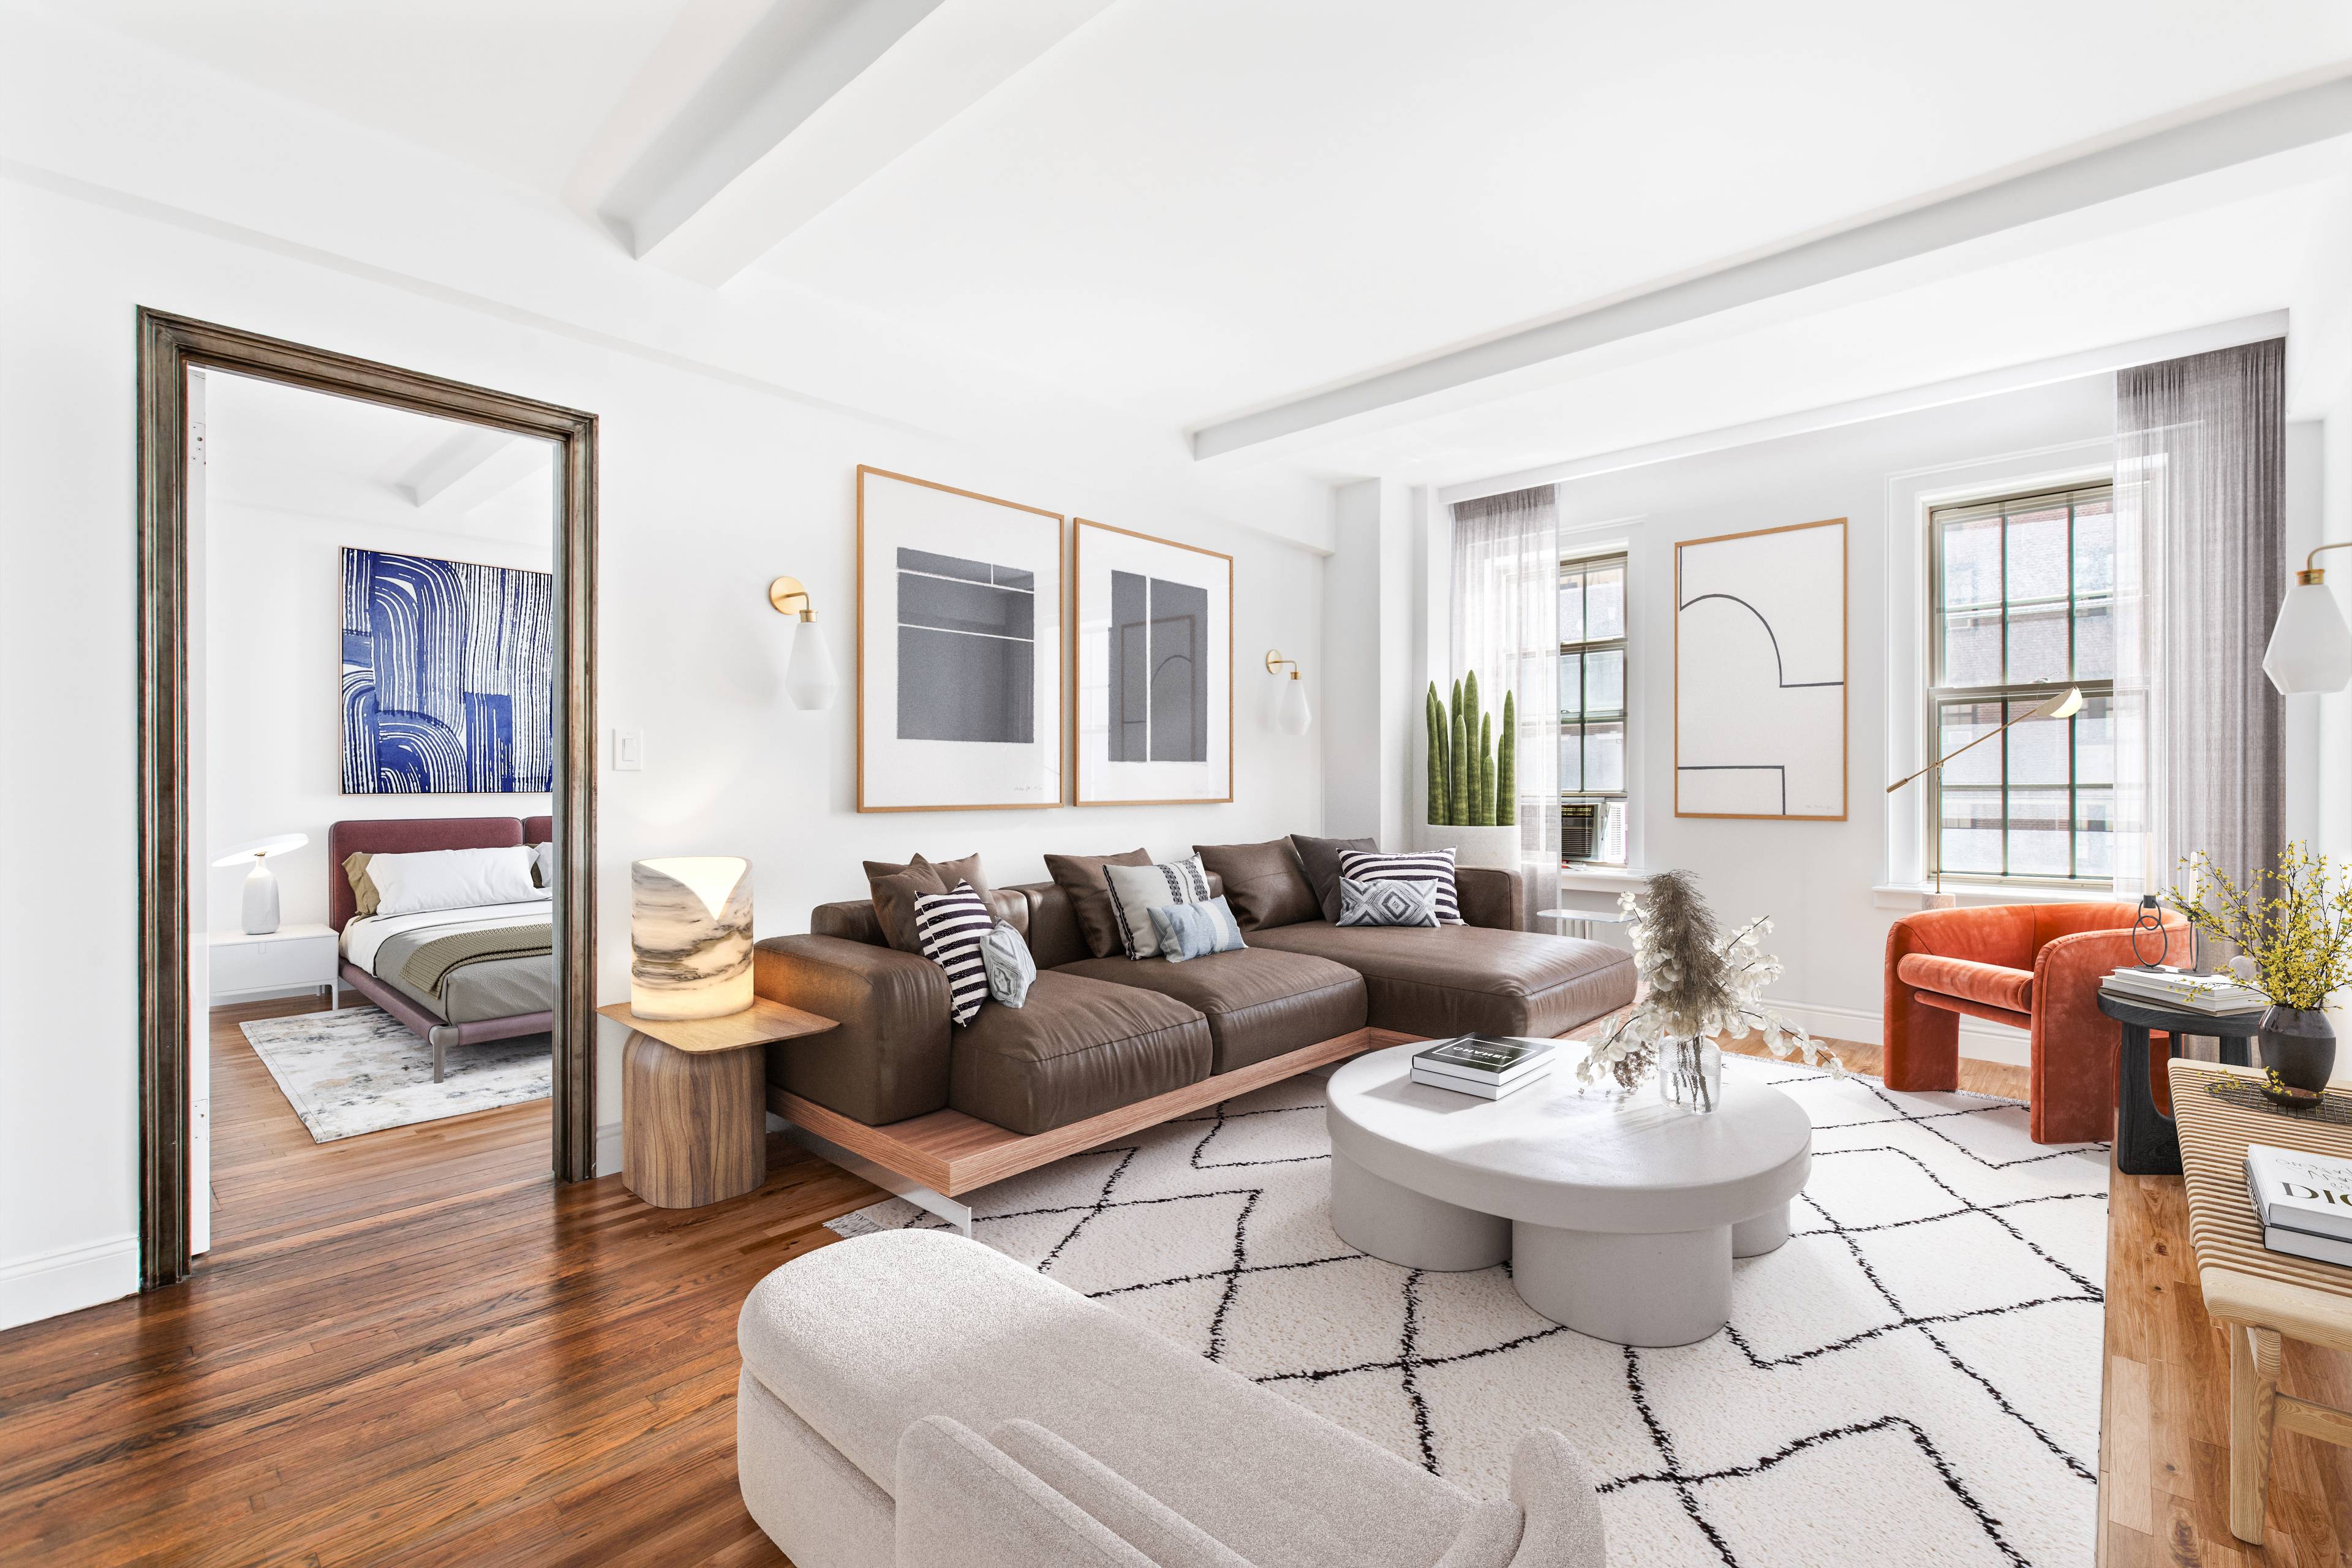 Make this one bedroom gem in the heart of Greenwich Village your own.